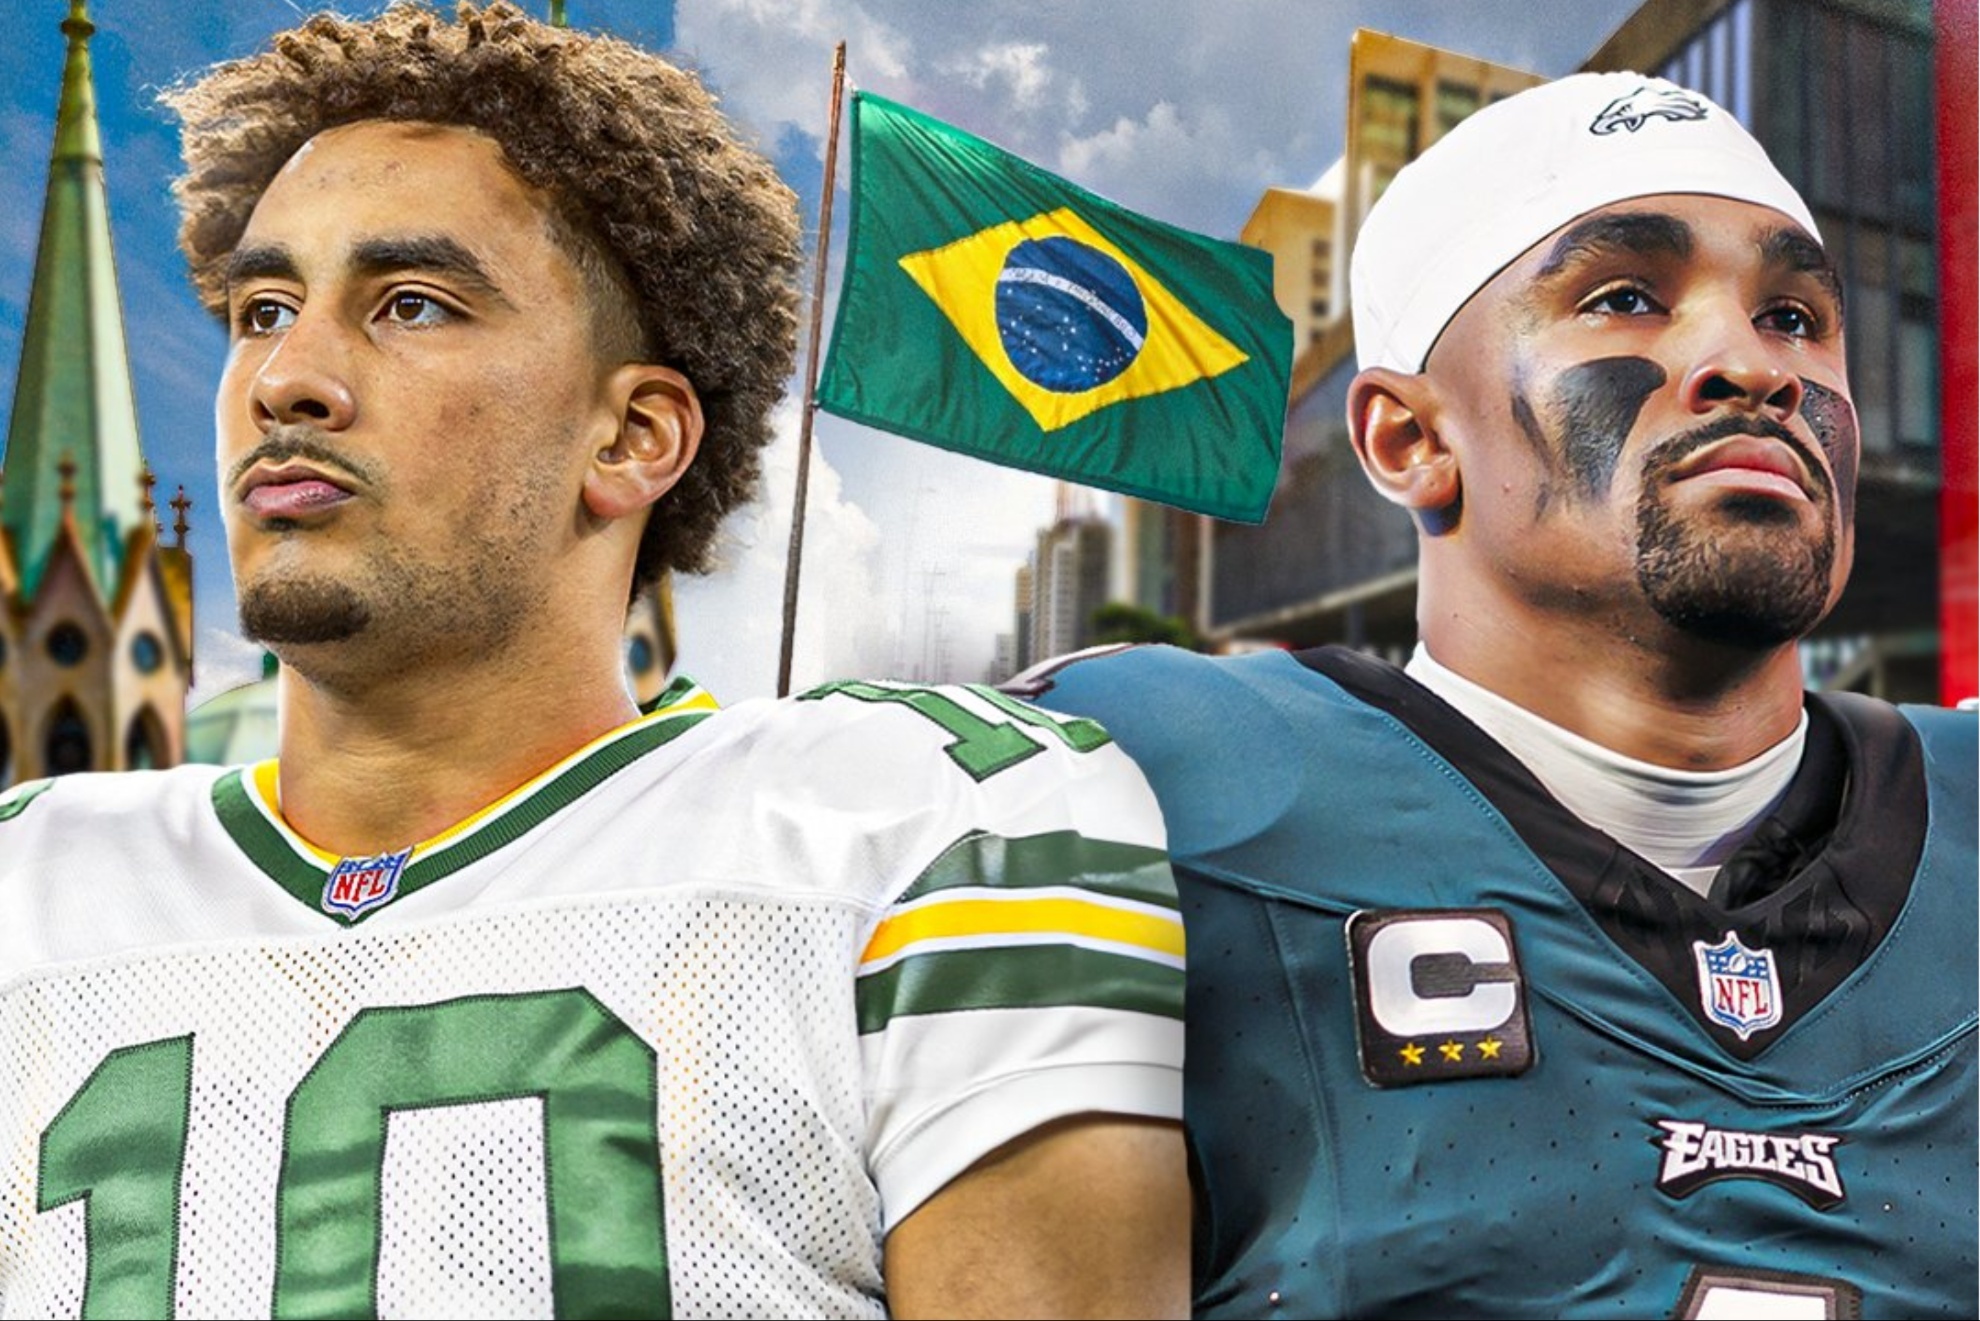 Jordan Love (Packers) and Jalen Hurts (Eagles) will clash in Sao Paulo in Week 1.